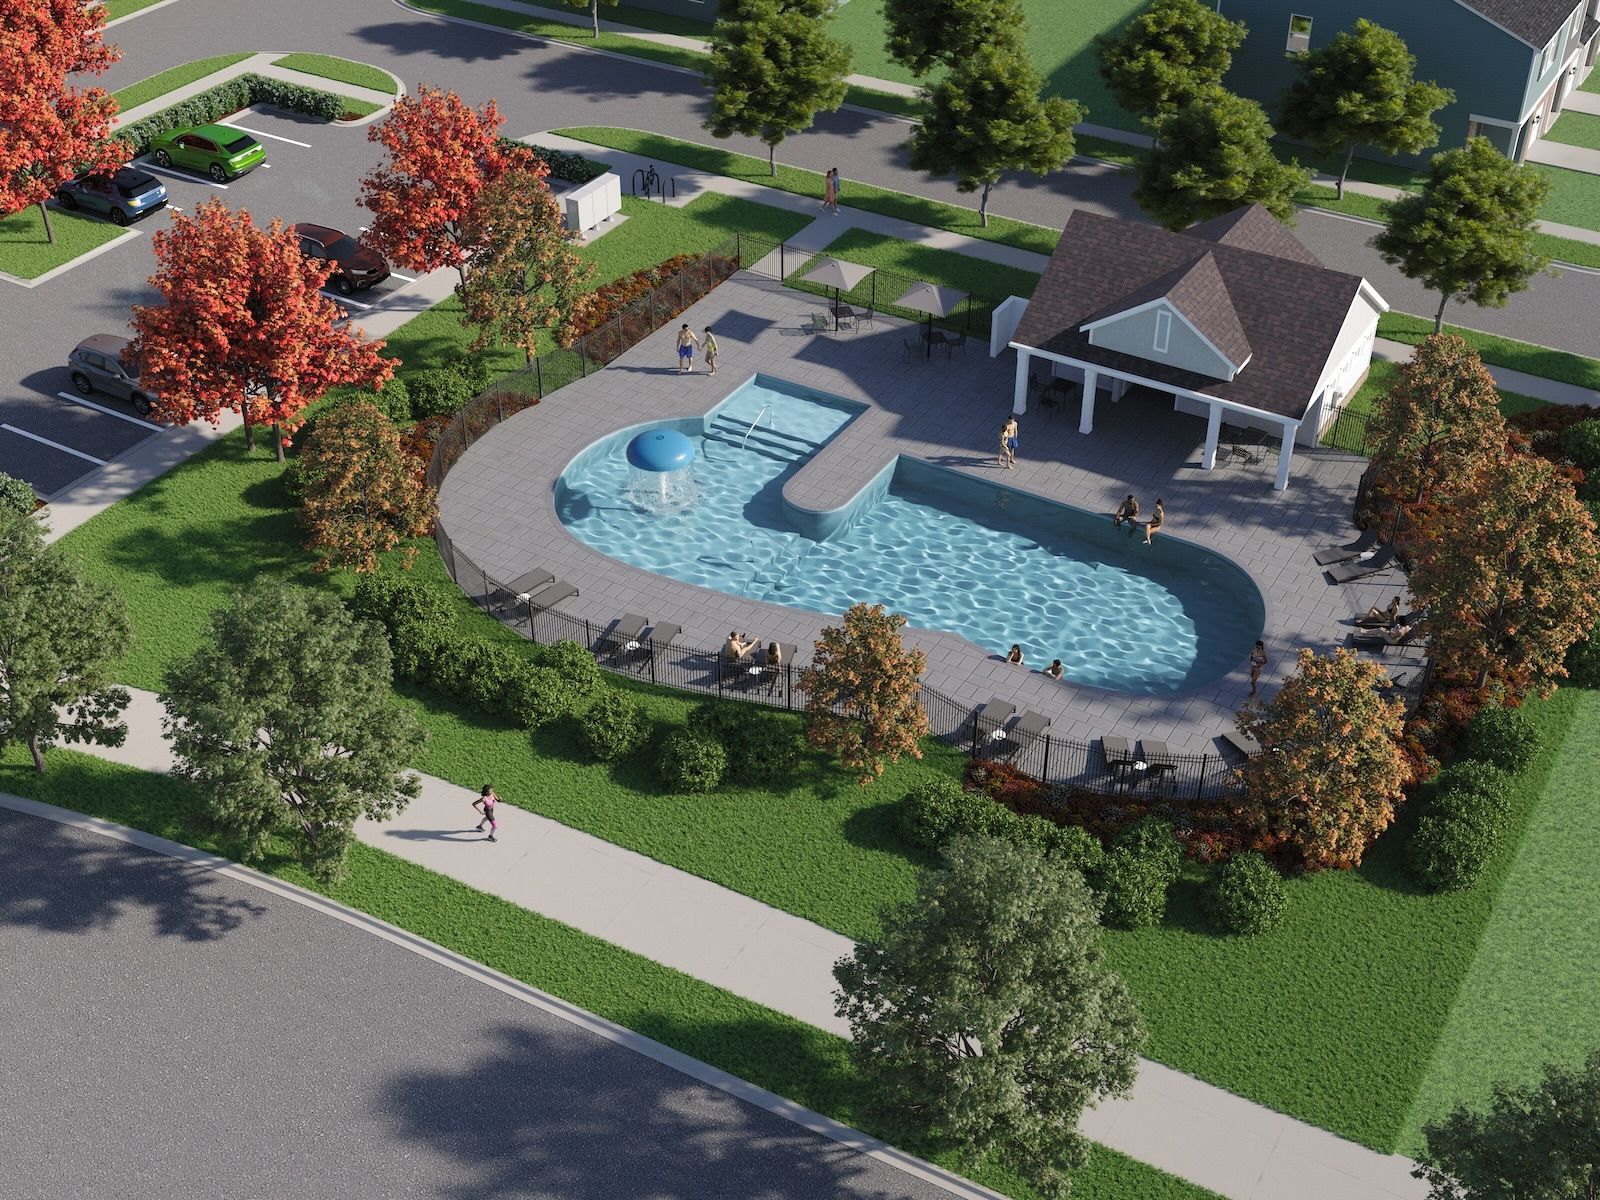 Enjoy a day in the sun at the community pool and cabana, coming soon.